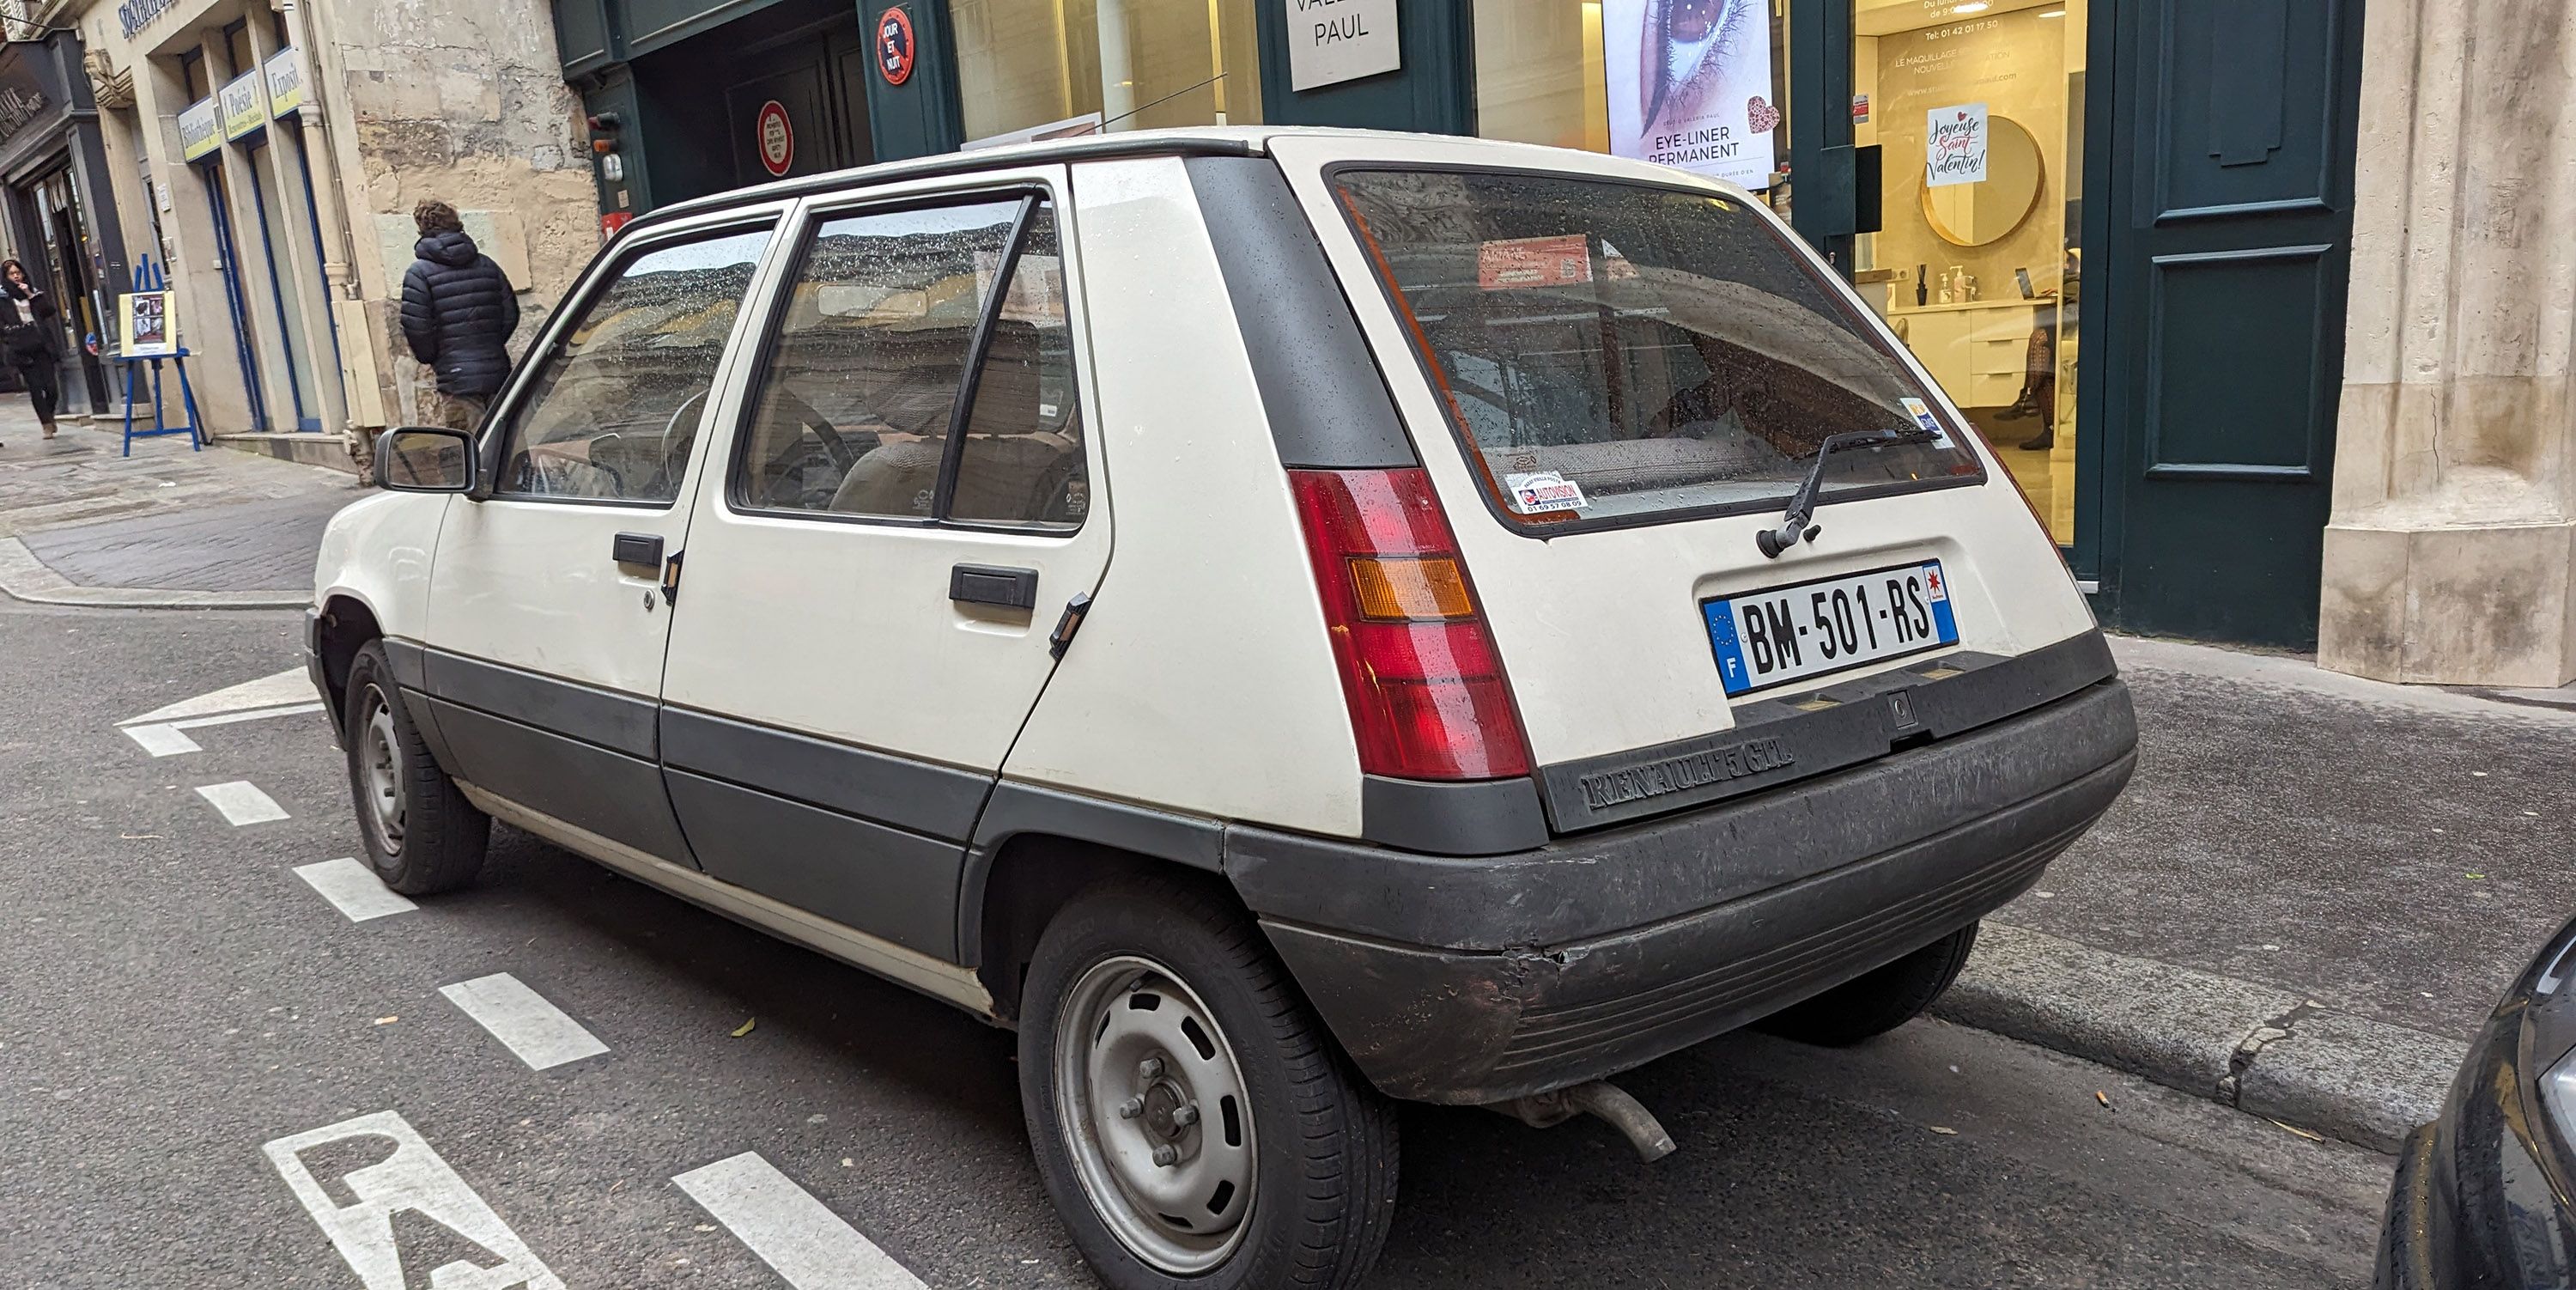 Renault Super 5 Is Spotted Down on the Parisian Street